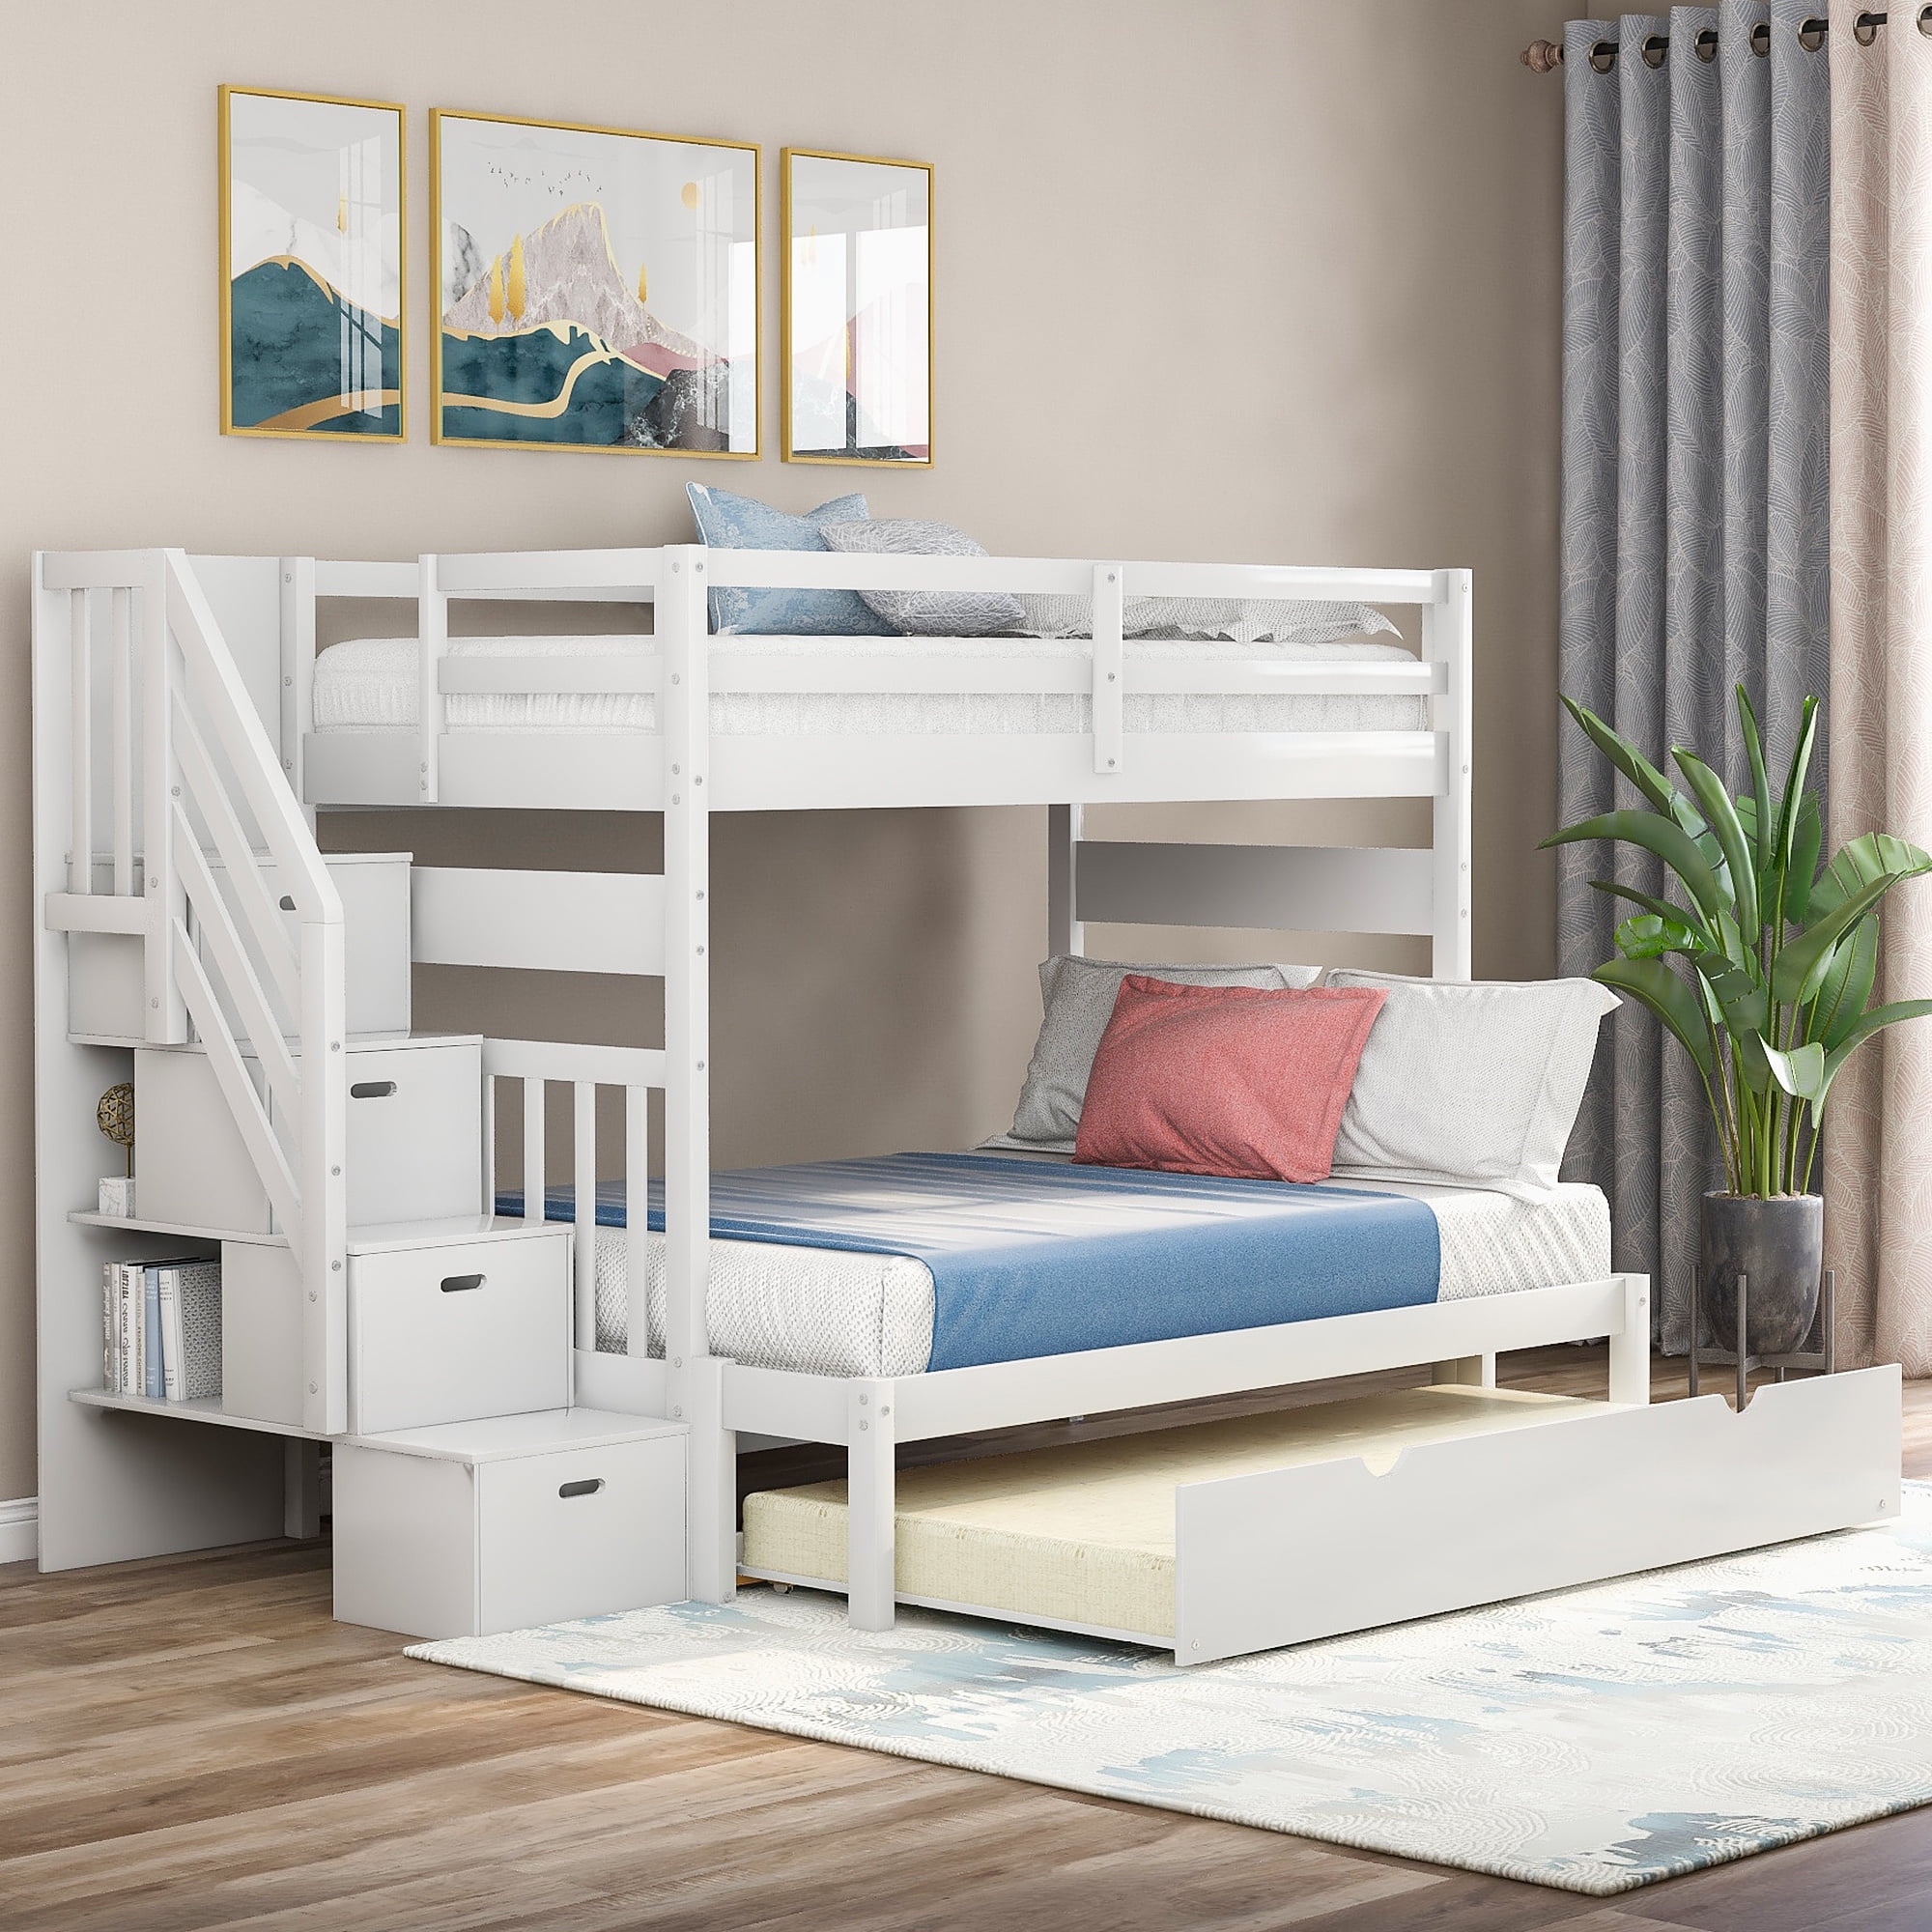 Full Staircase Bunk Bed, Discovery World Furniture Weston Twin Over Full Bunk Bed